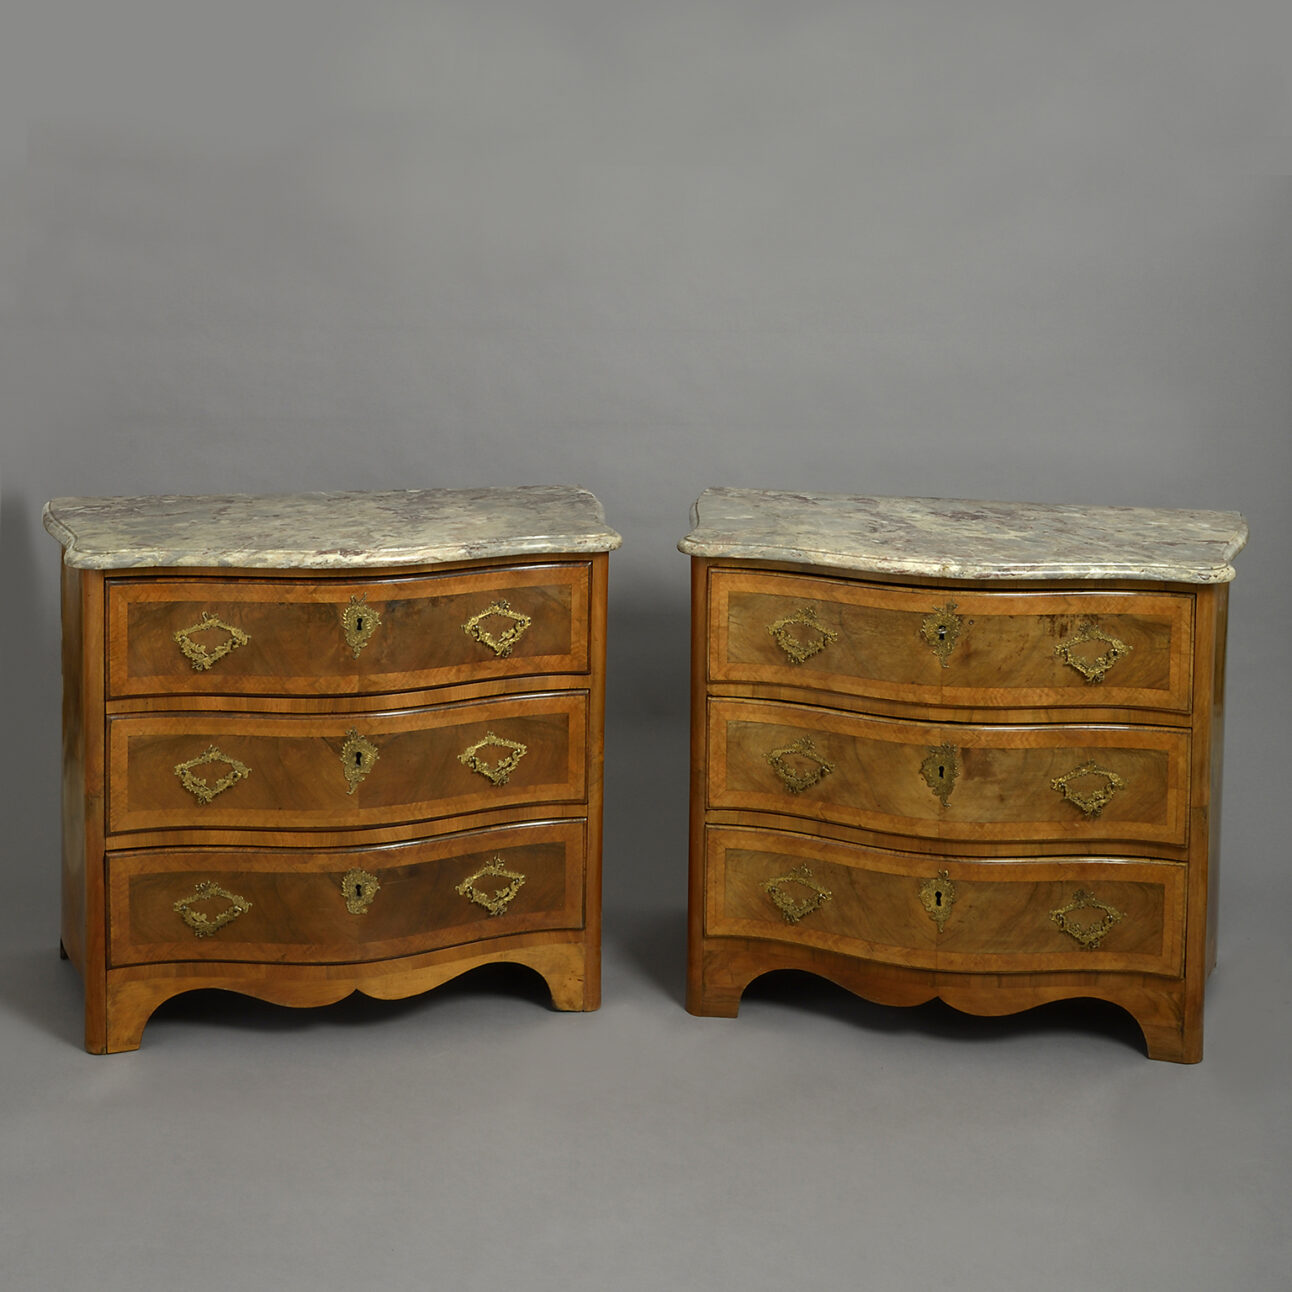 |pair of 18th century Bavarian marble-topped walnut-veneered commodes